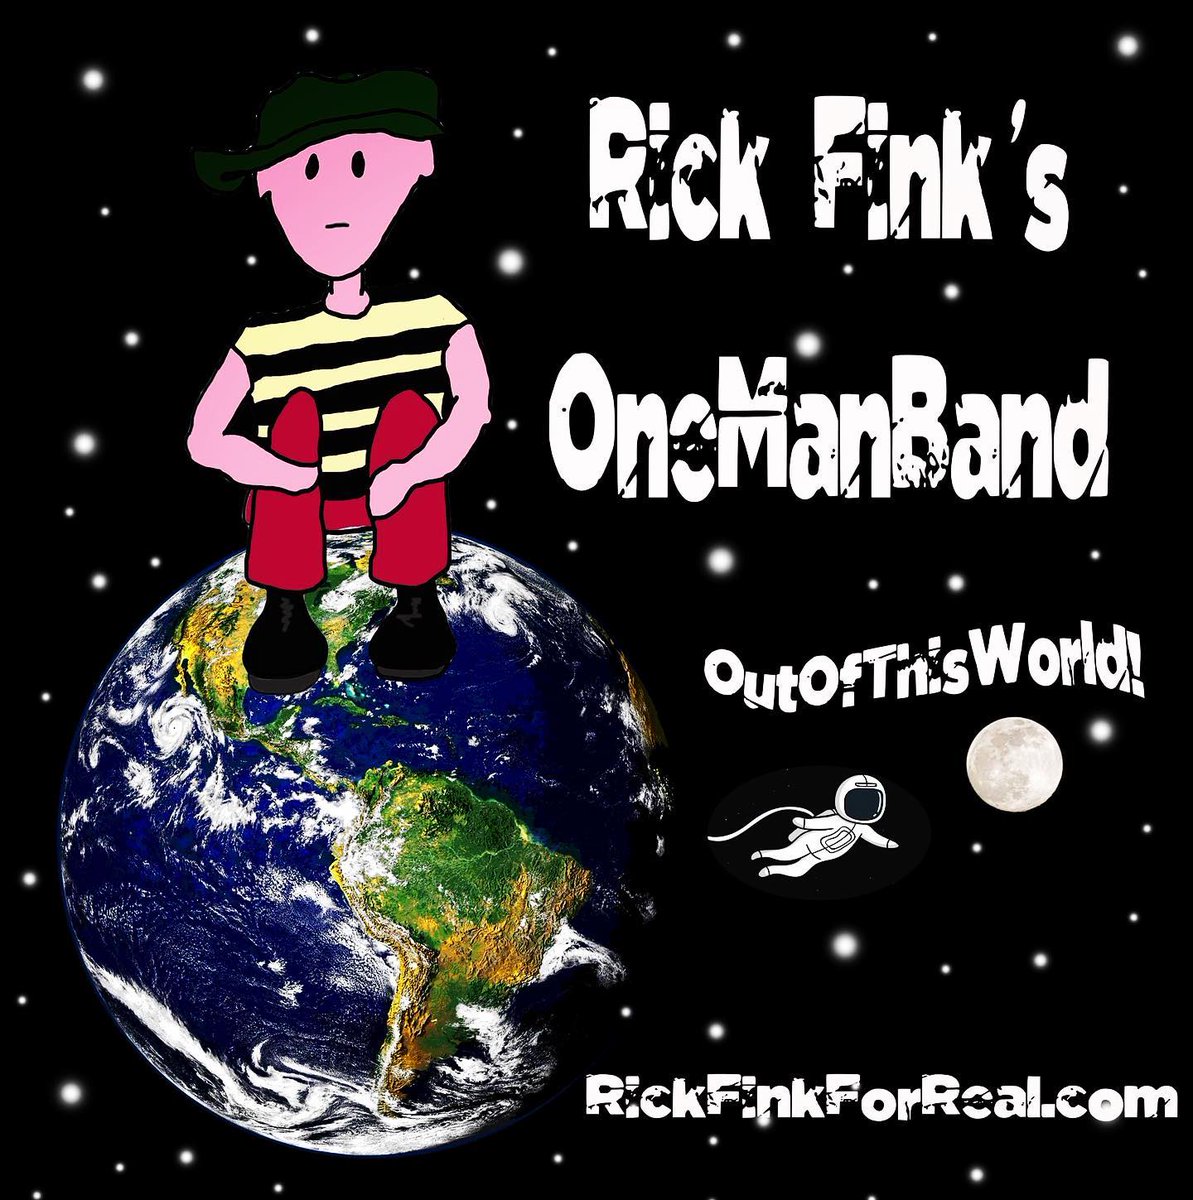 You'll be sitting on top of the #world when you catch Rick Fink #performing from 8 to 10 p.m. on Wednesday, Aug. 2, at Duffy's Tavern, 1412 O St., #Lincoln, #Nebraska. #music #musician #singer #songwriter #concert #concerts #onemanband #lincolnne